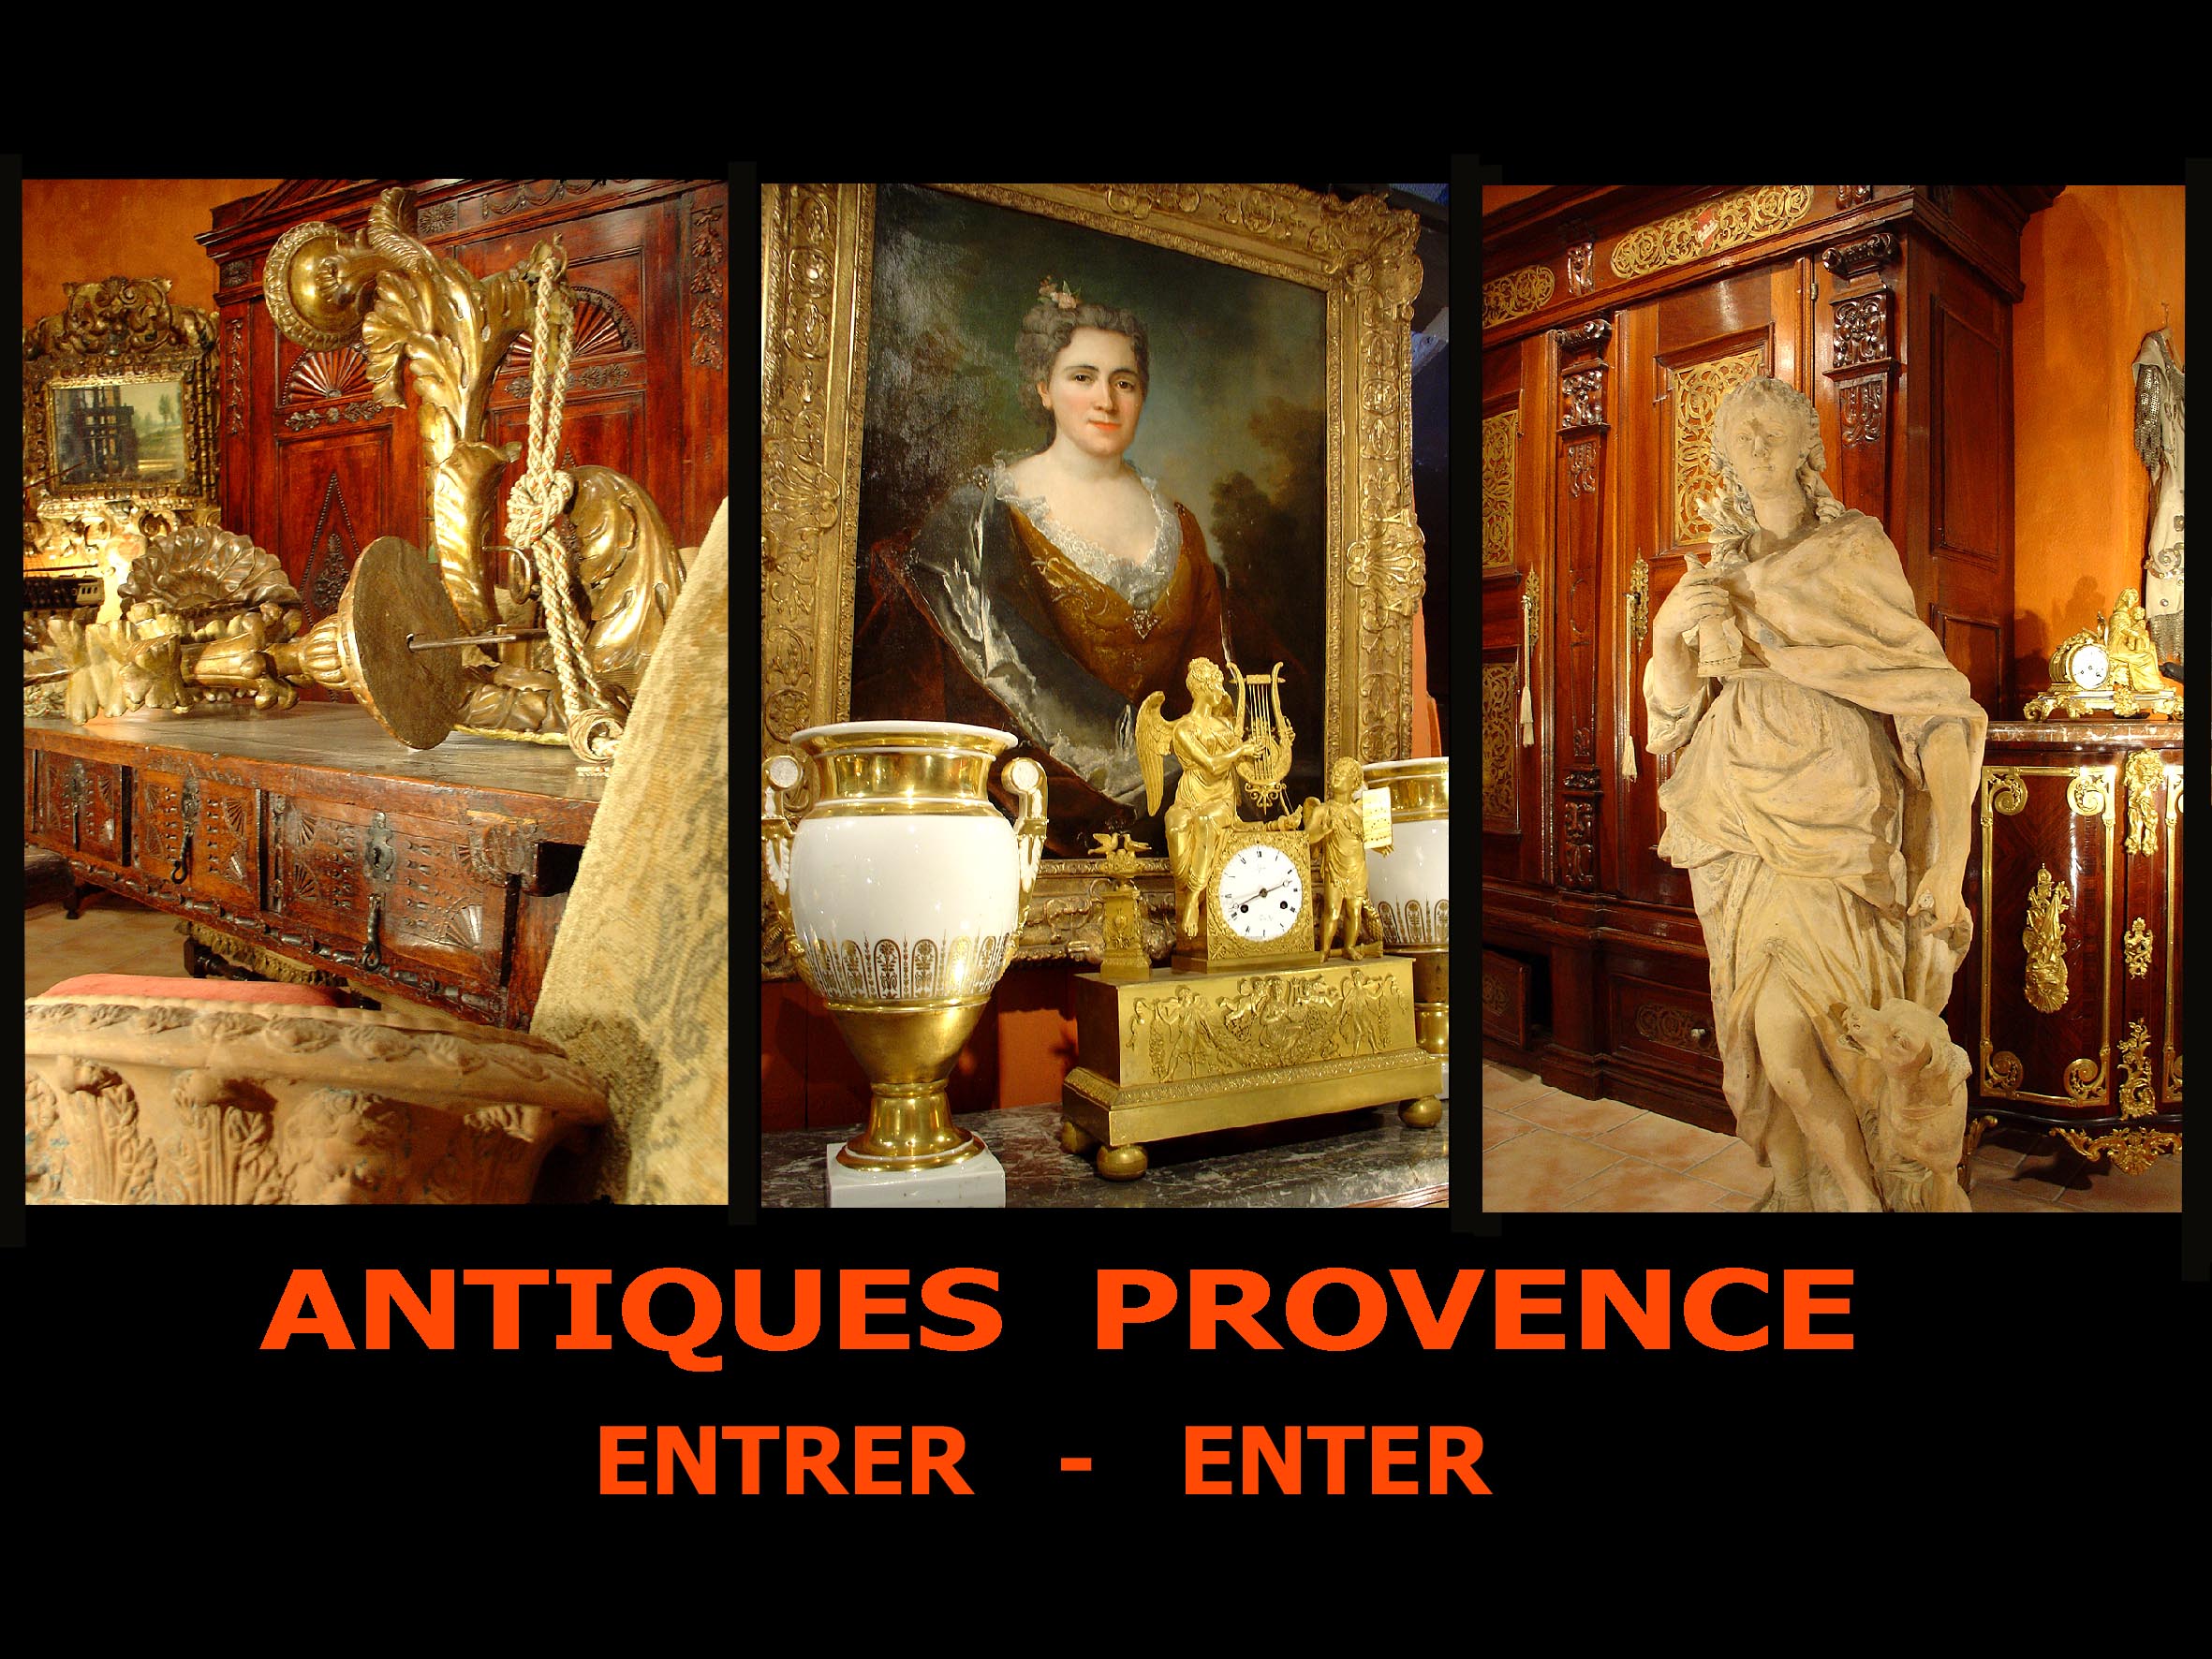 Antiques provence :Fine French and european antiques all periods up to charles X, Furniture - Paintings - Statuary - Accessories, Isle sur la sorgue, Vaucluse.